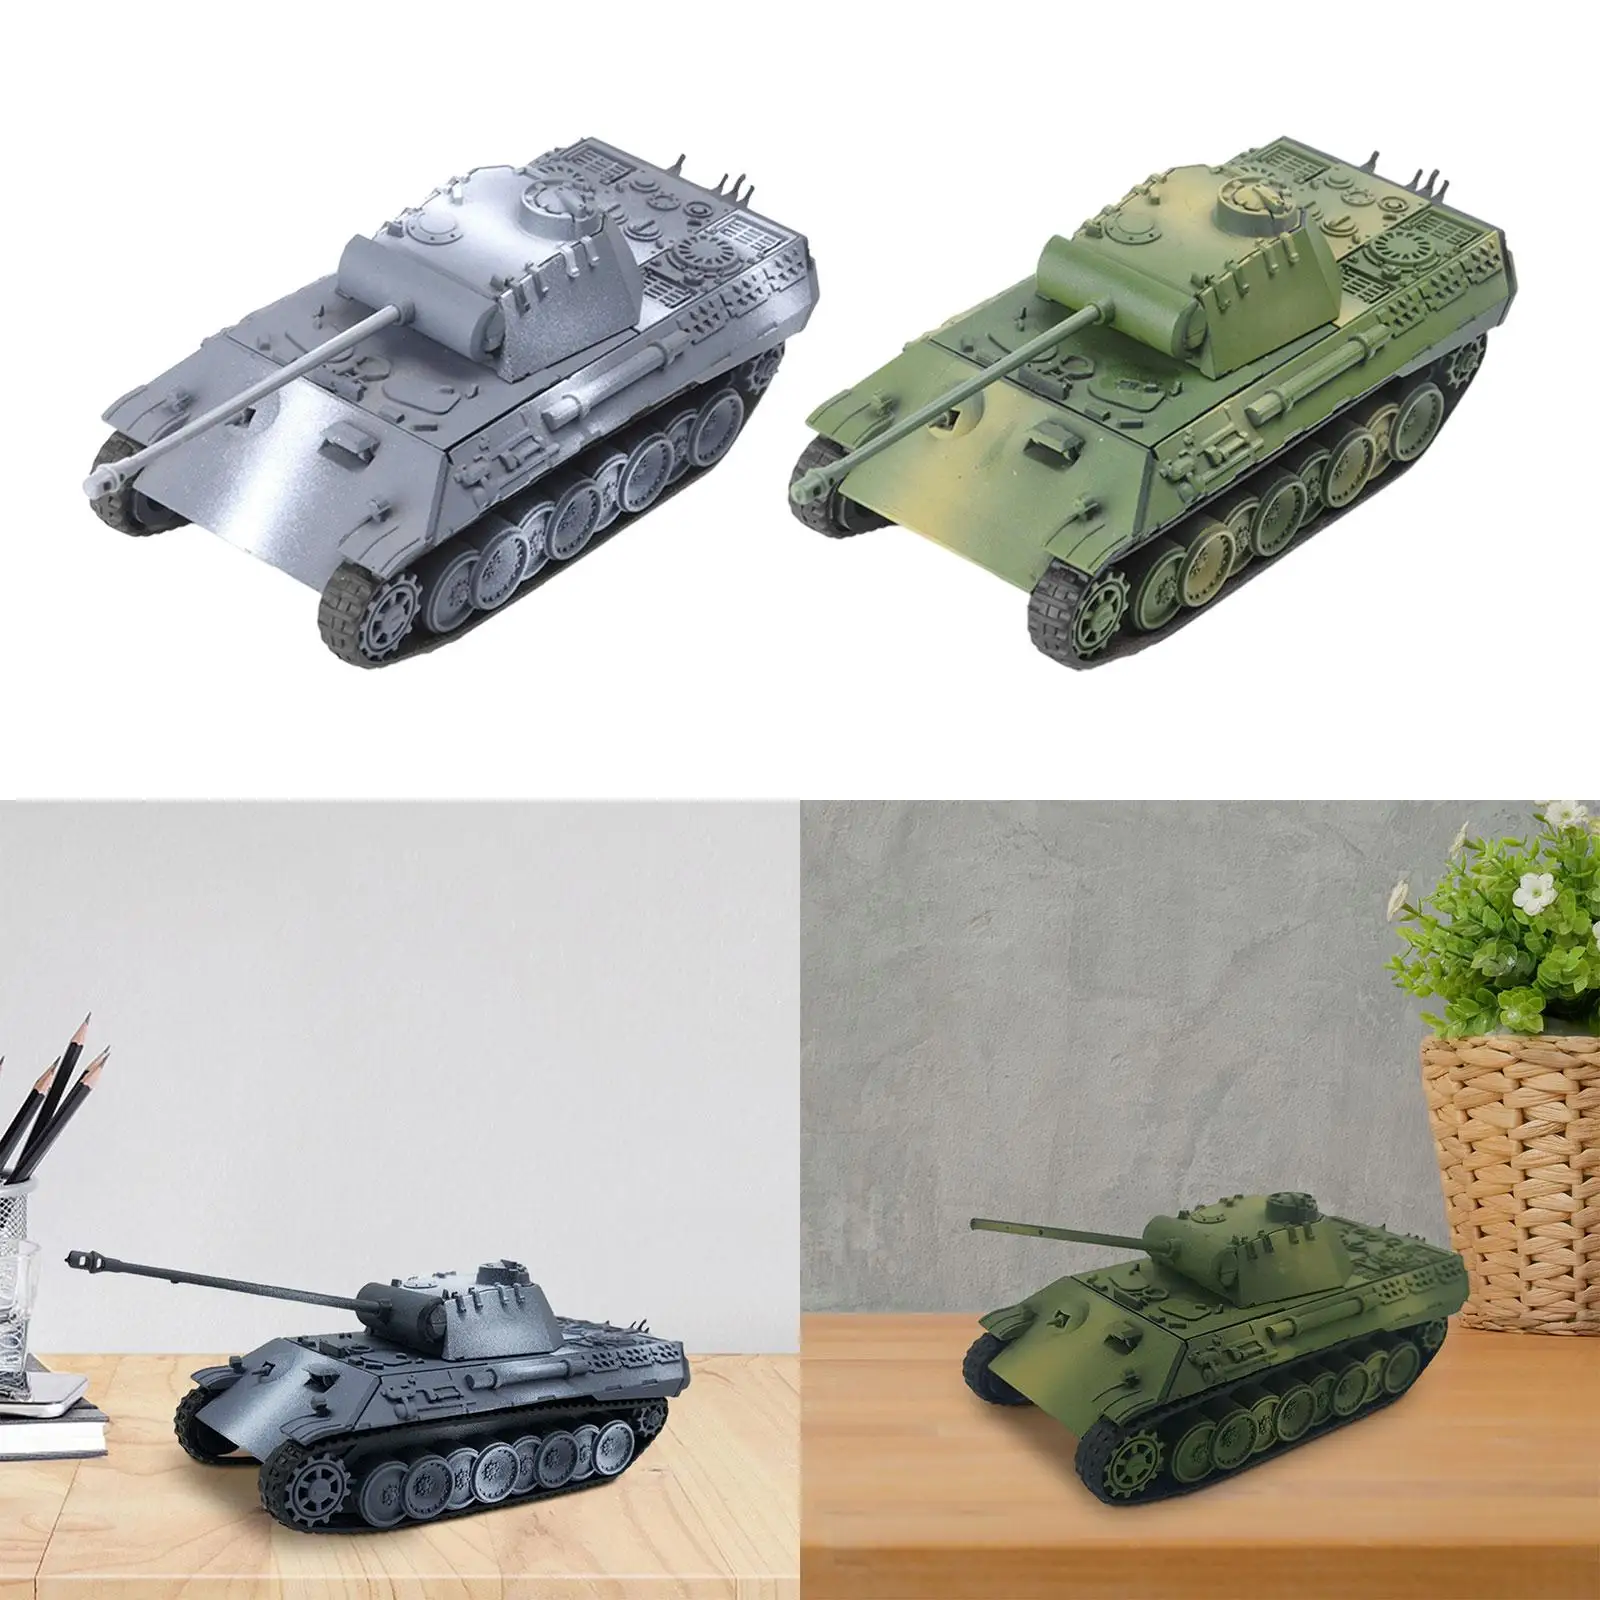 1:72 Scale Tank Model Kits DIY Assemble Simulation Miniature Tank Building Collection for Children Adults Boys Gifts